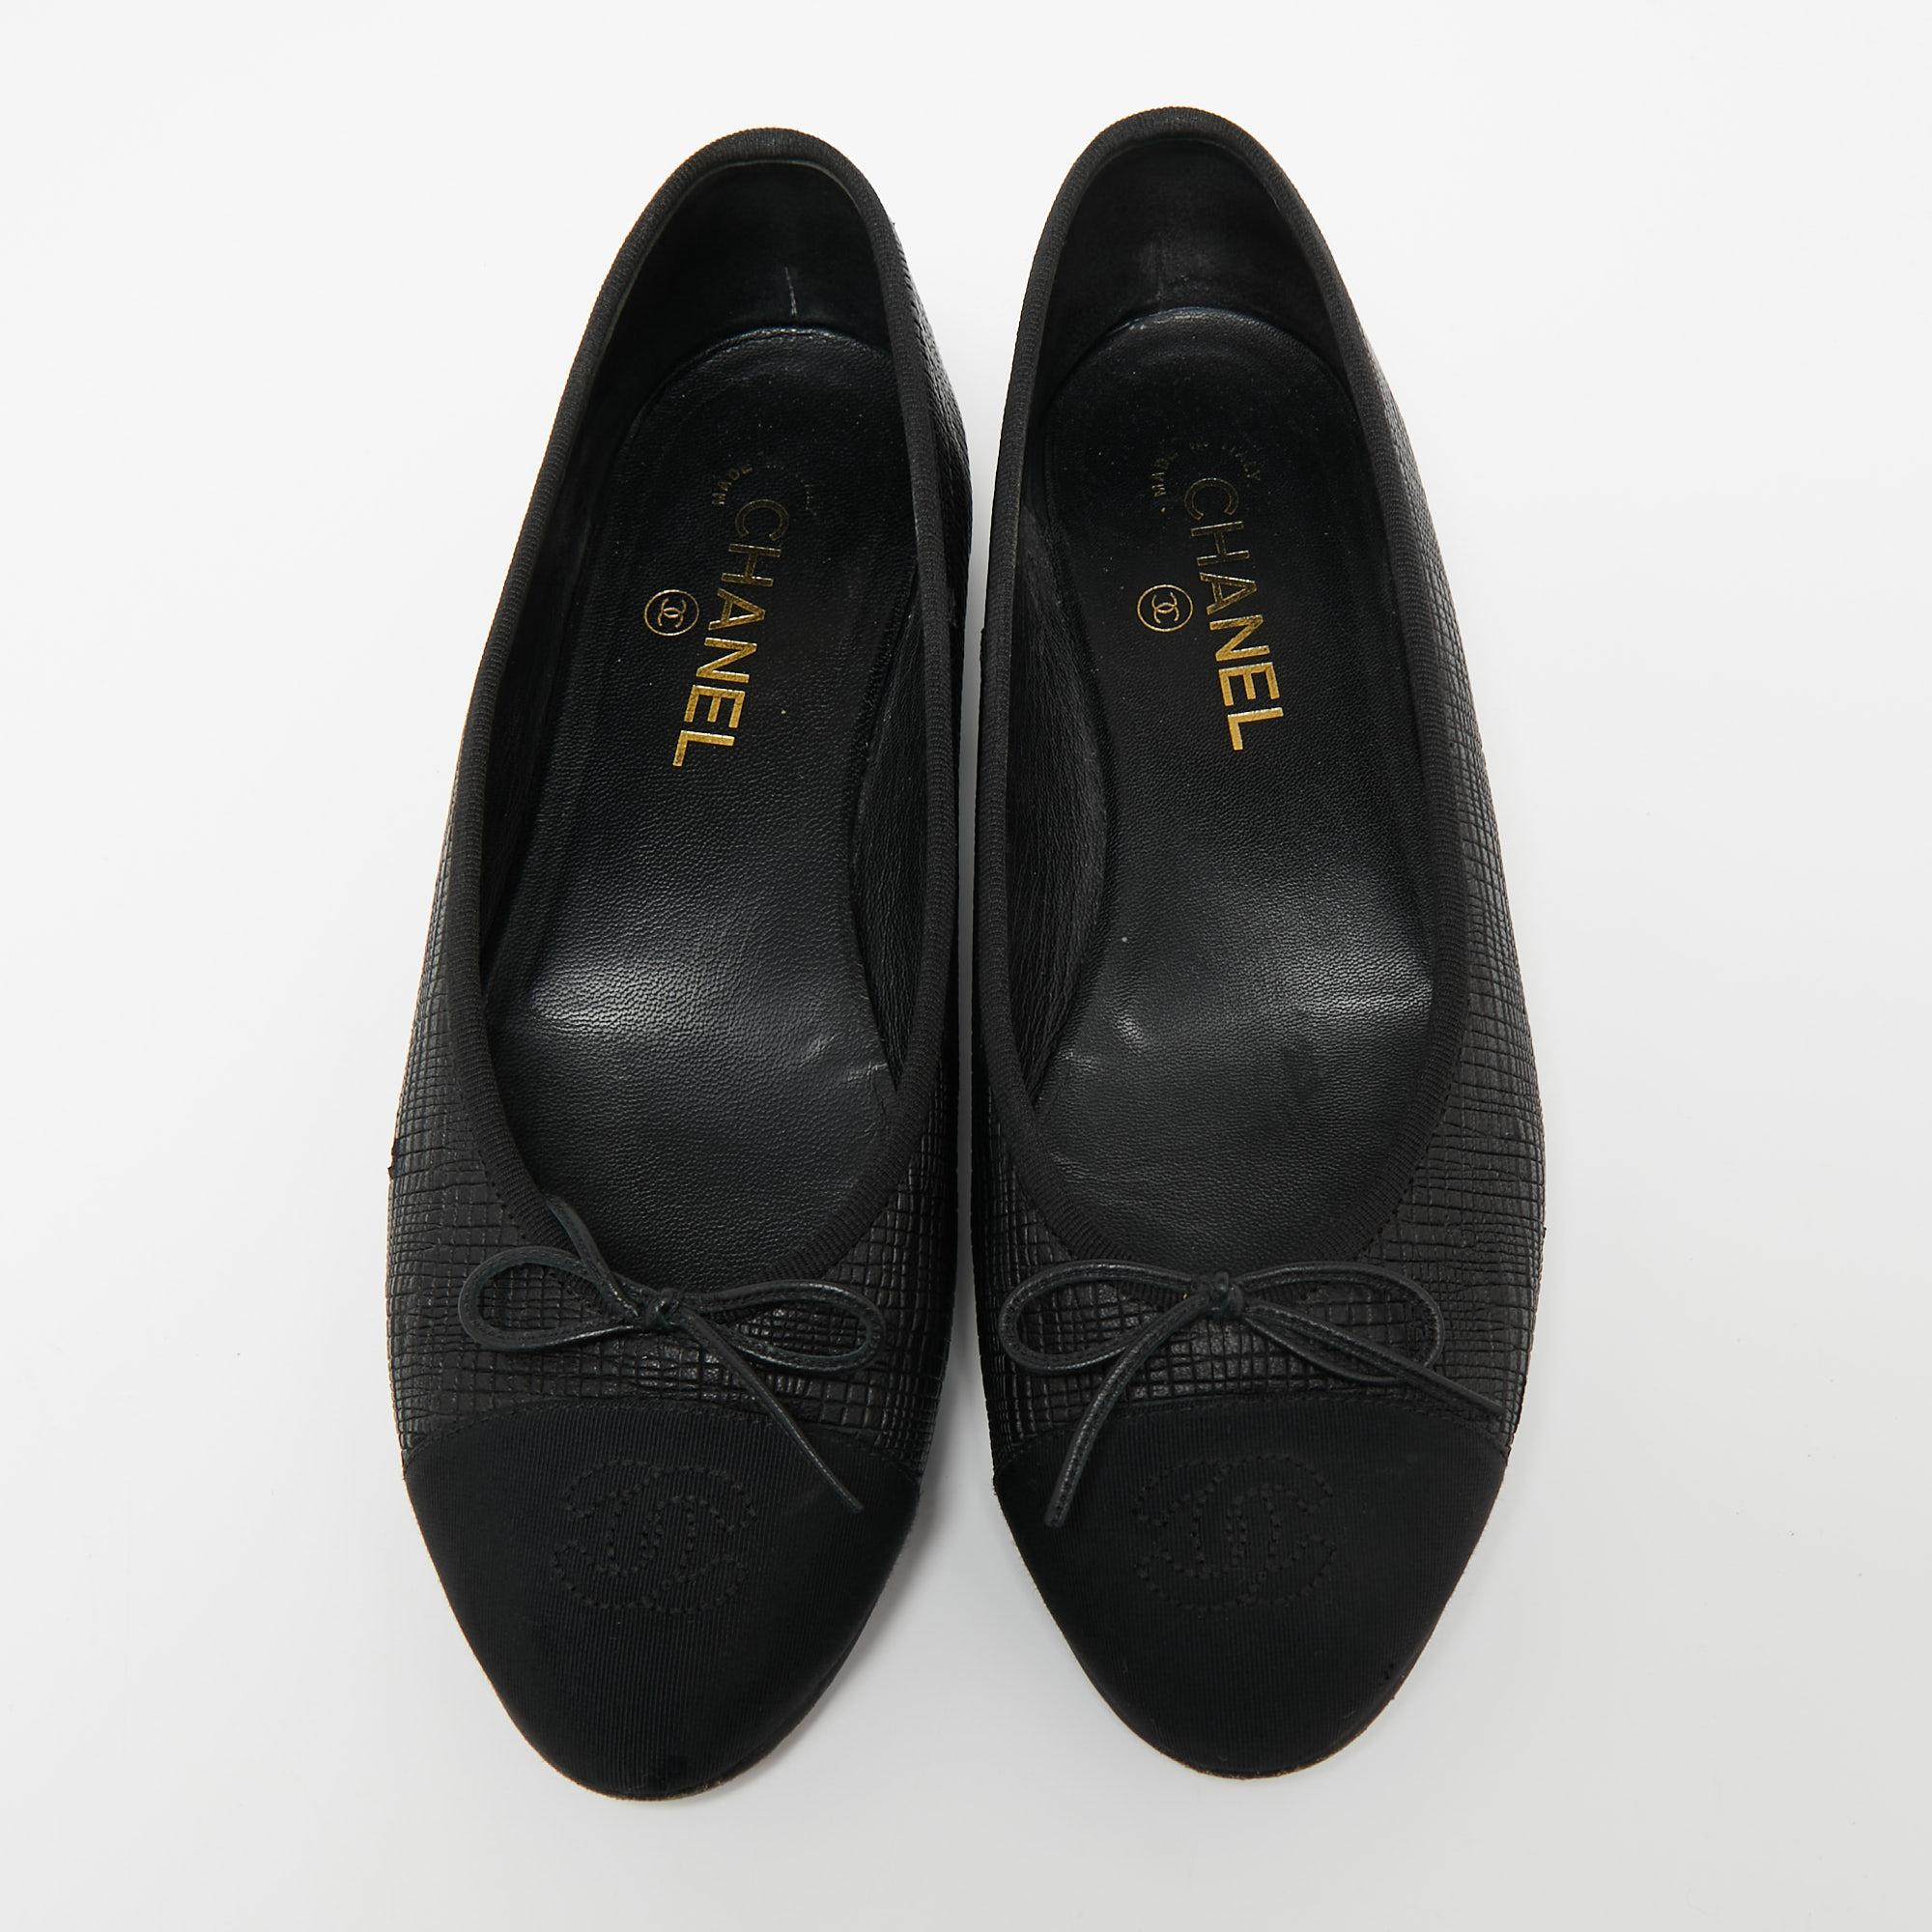 These ballet flats from the House of Chanel will certainly deliver a sense of elegance and poise with their chic design. They are made from textured leather and feature a bow detail on the fabric cap toes. These Chanel ballet flats will help you